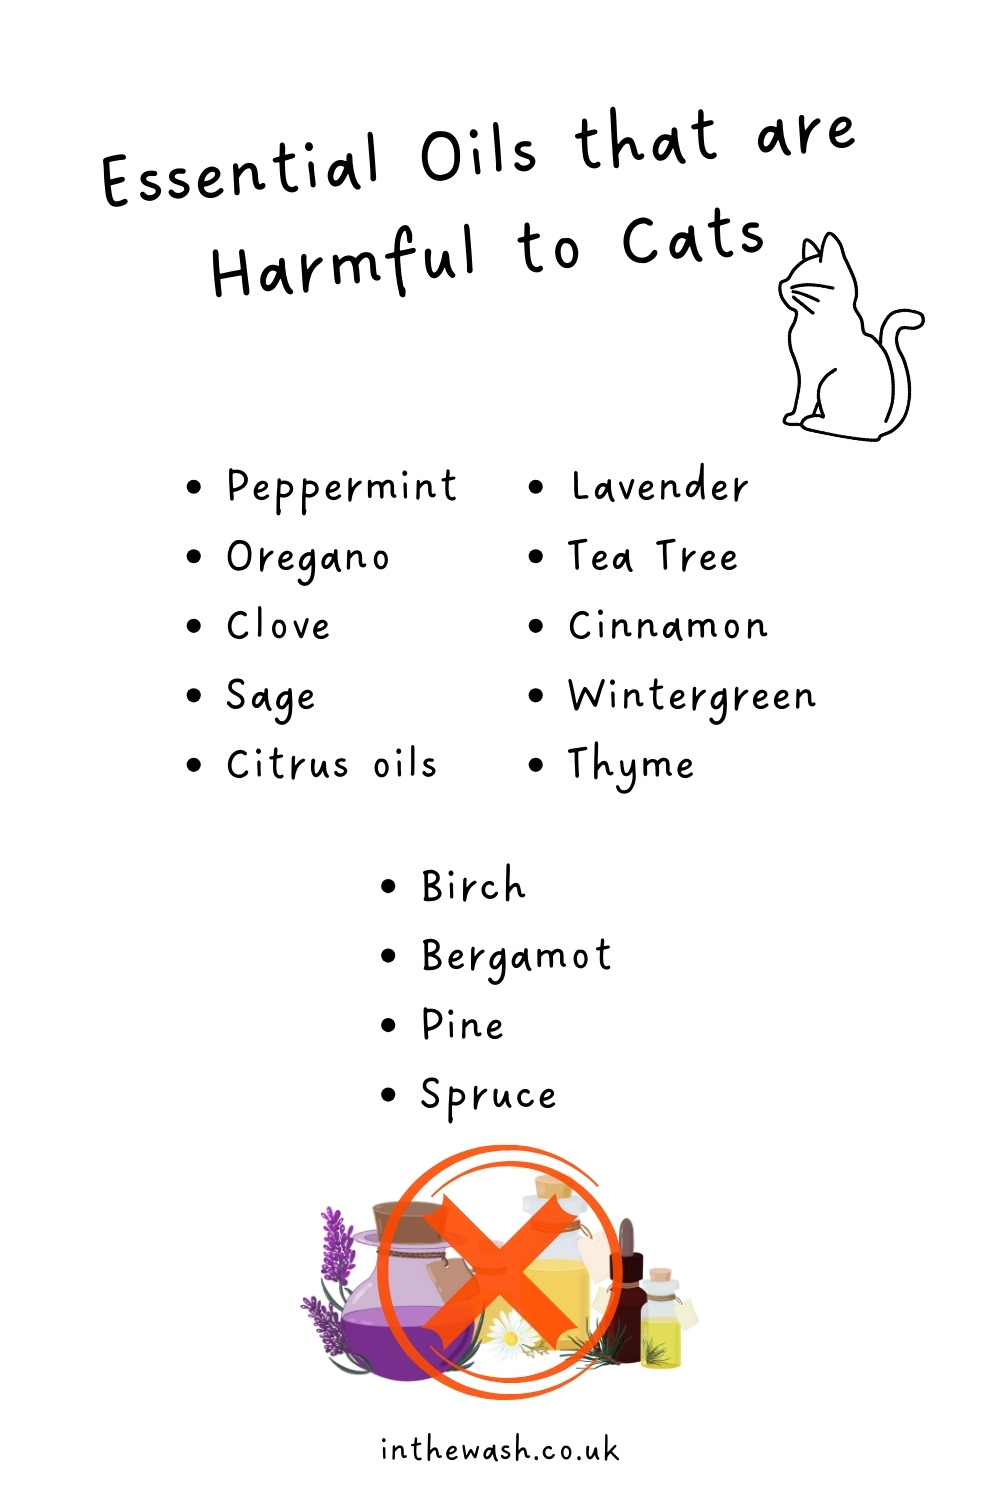 Essential oils that are harmful to cats